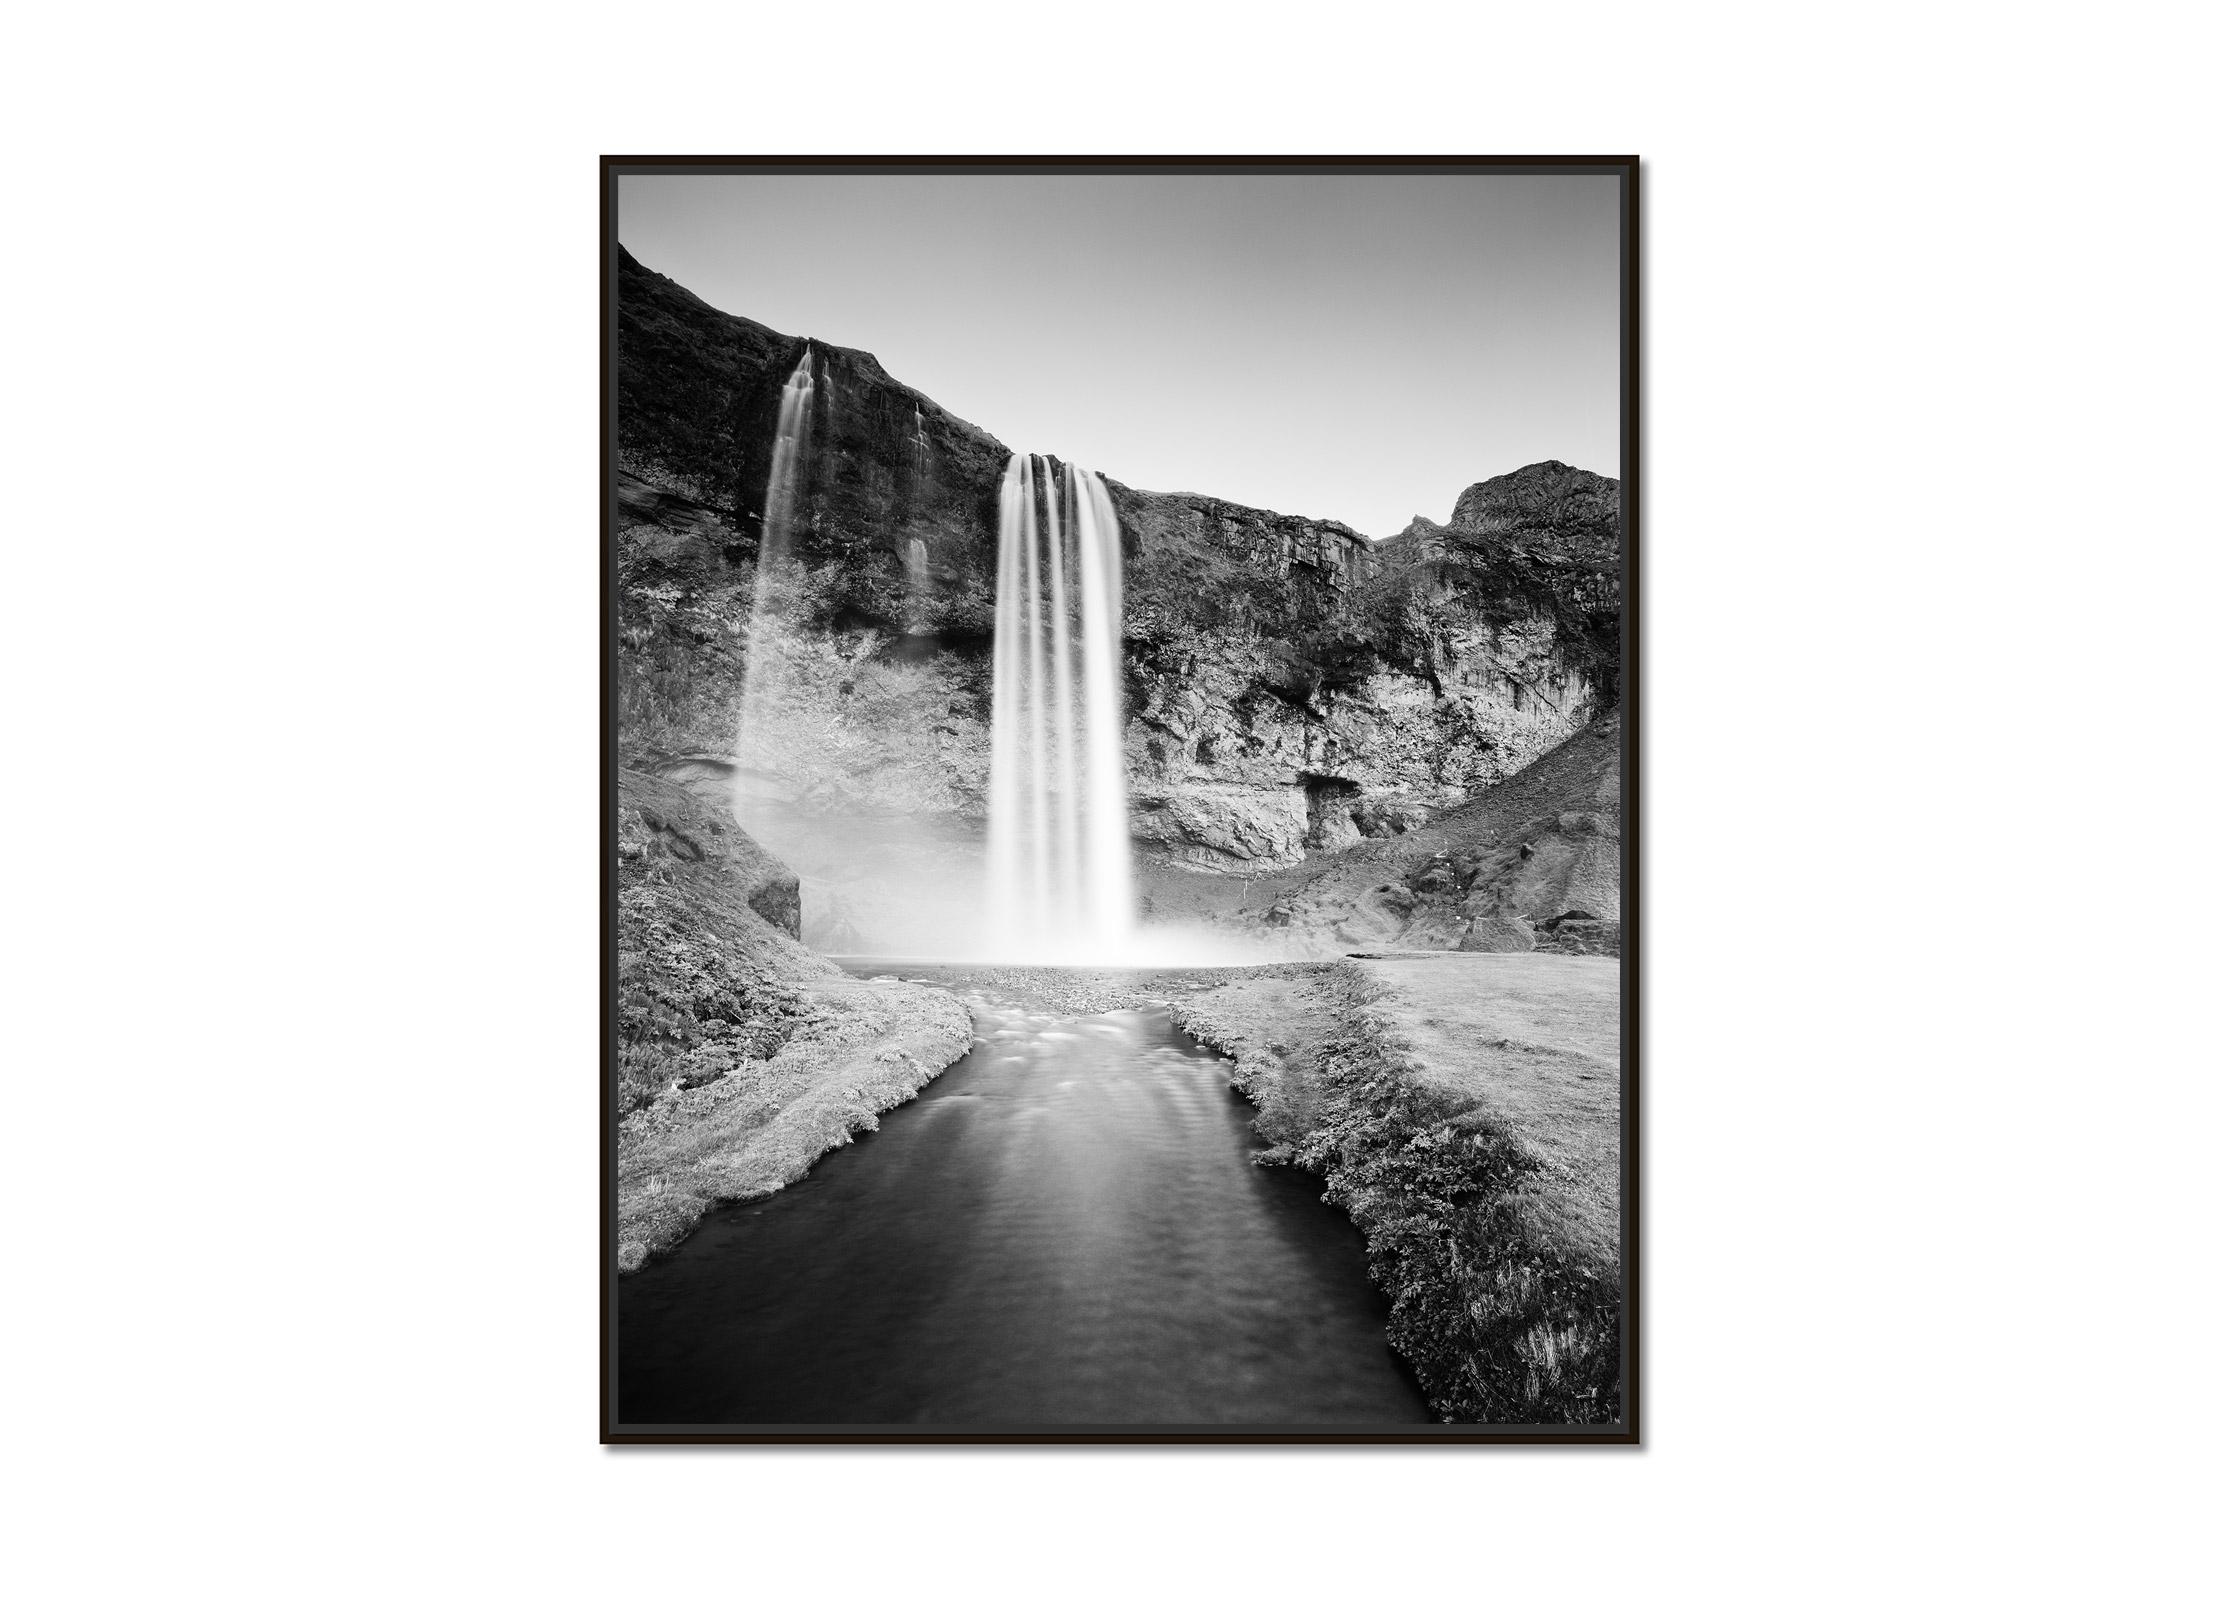 Seljalandsfoss, Waterfall, Iceland, black and white art waterscape photography - Photograph by Gerald Berghammer